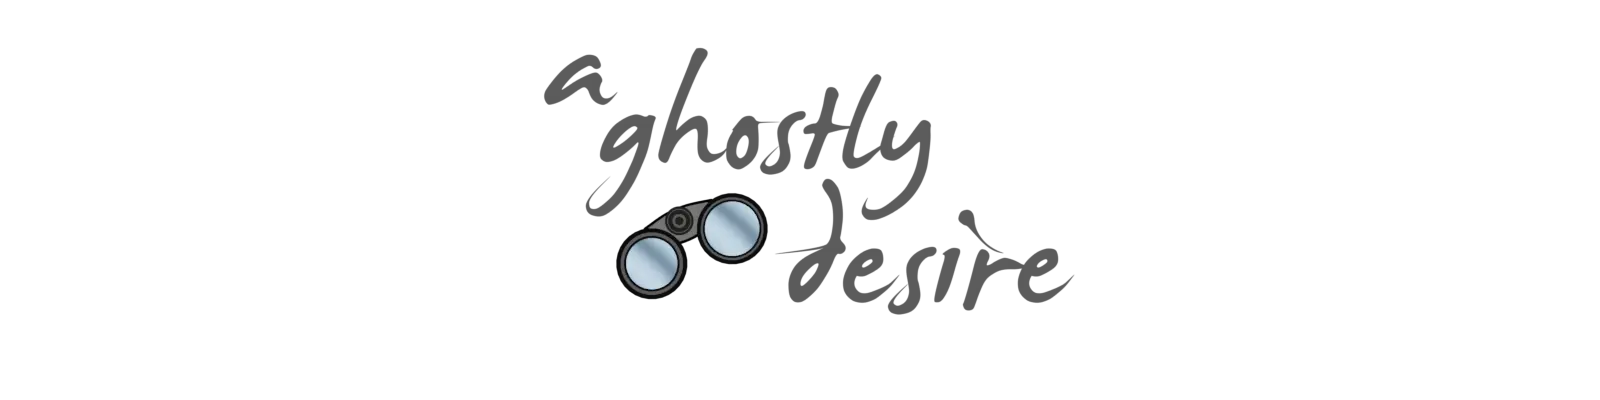 A ghostly desire [v0.1] main image